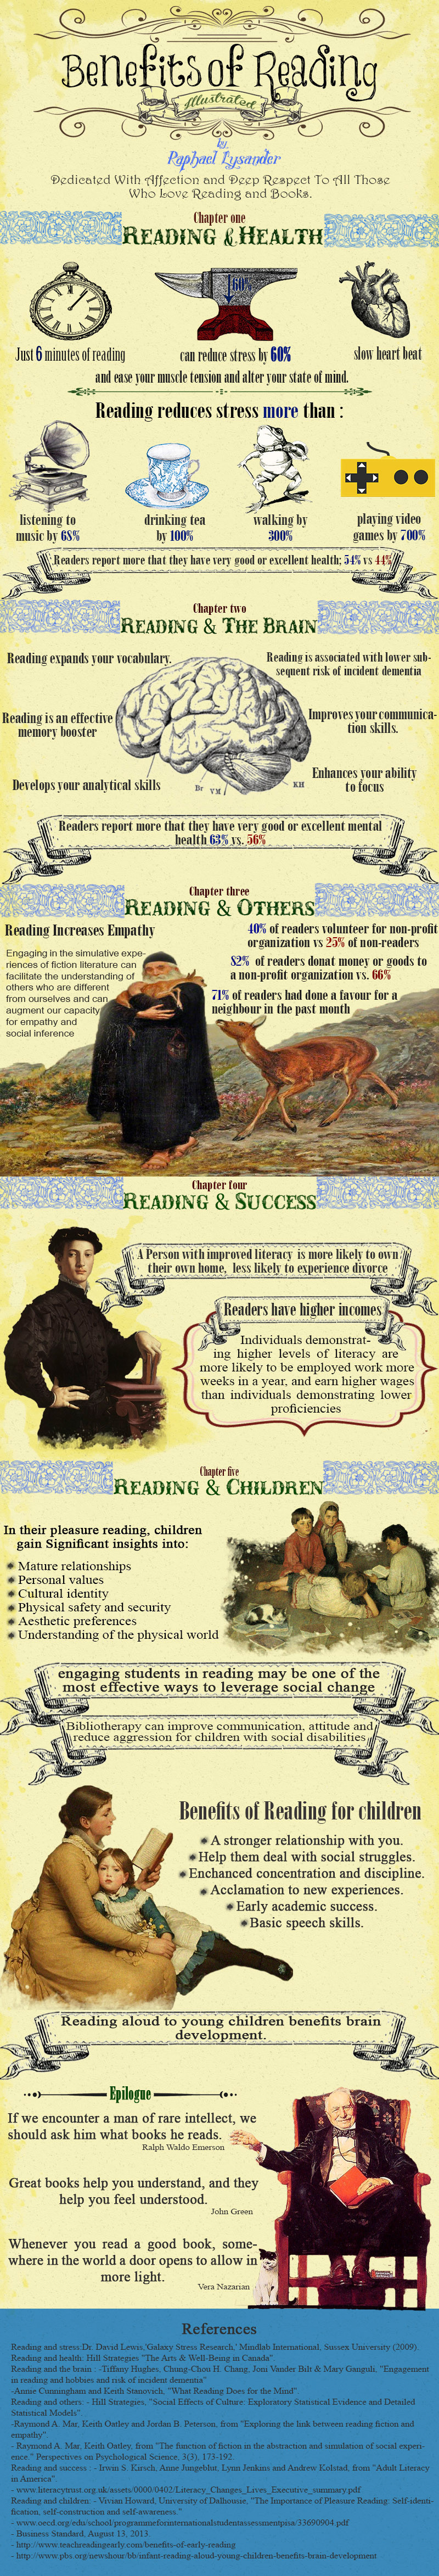 The_Benefits_of_Reading